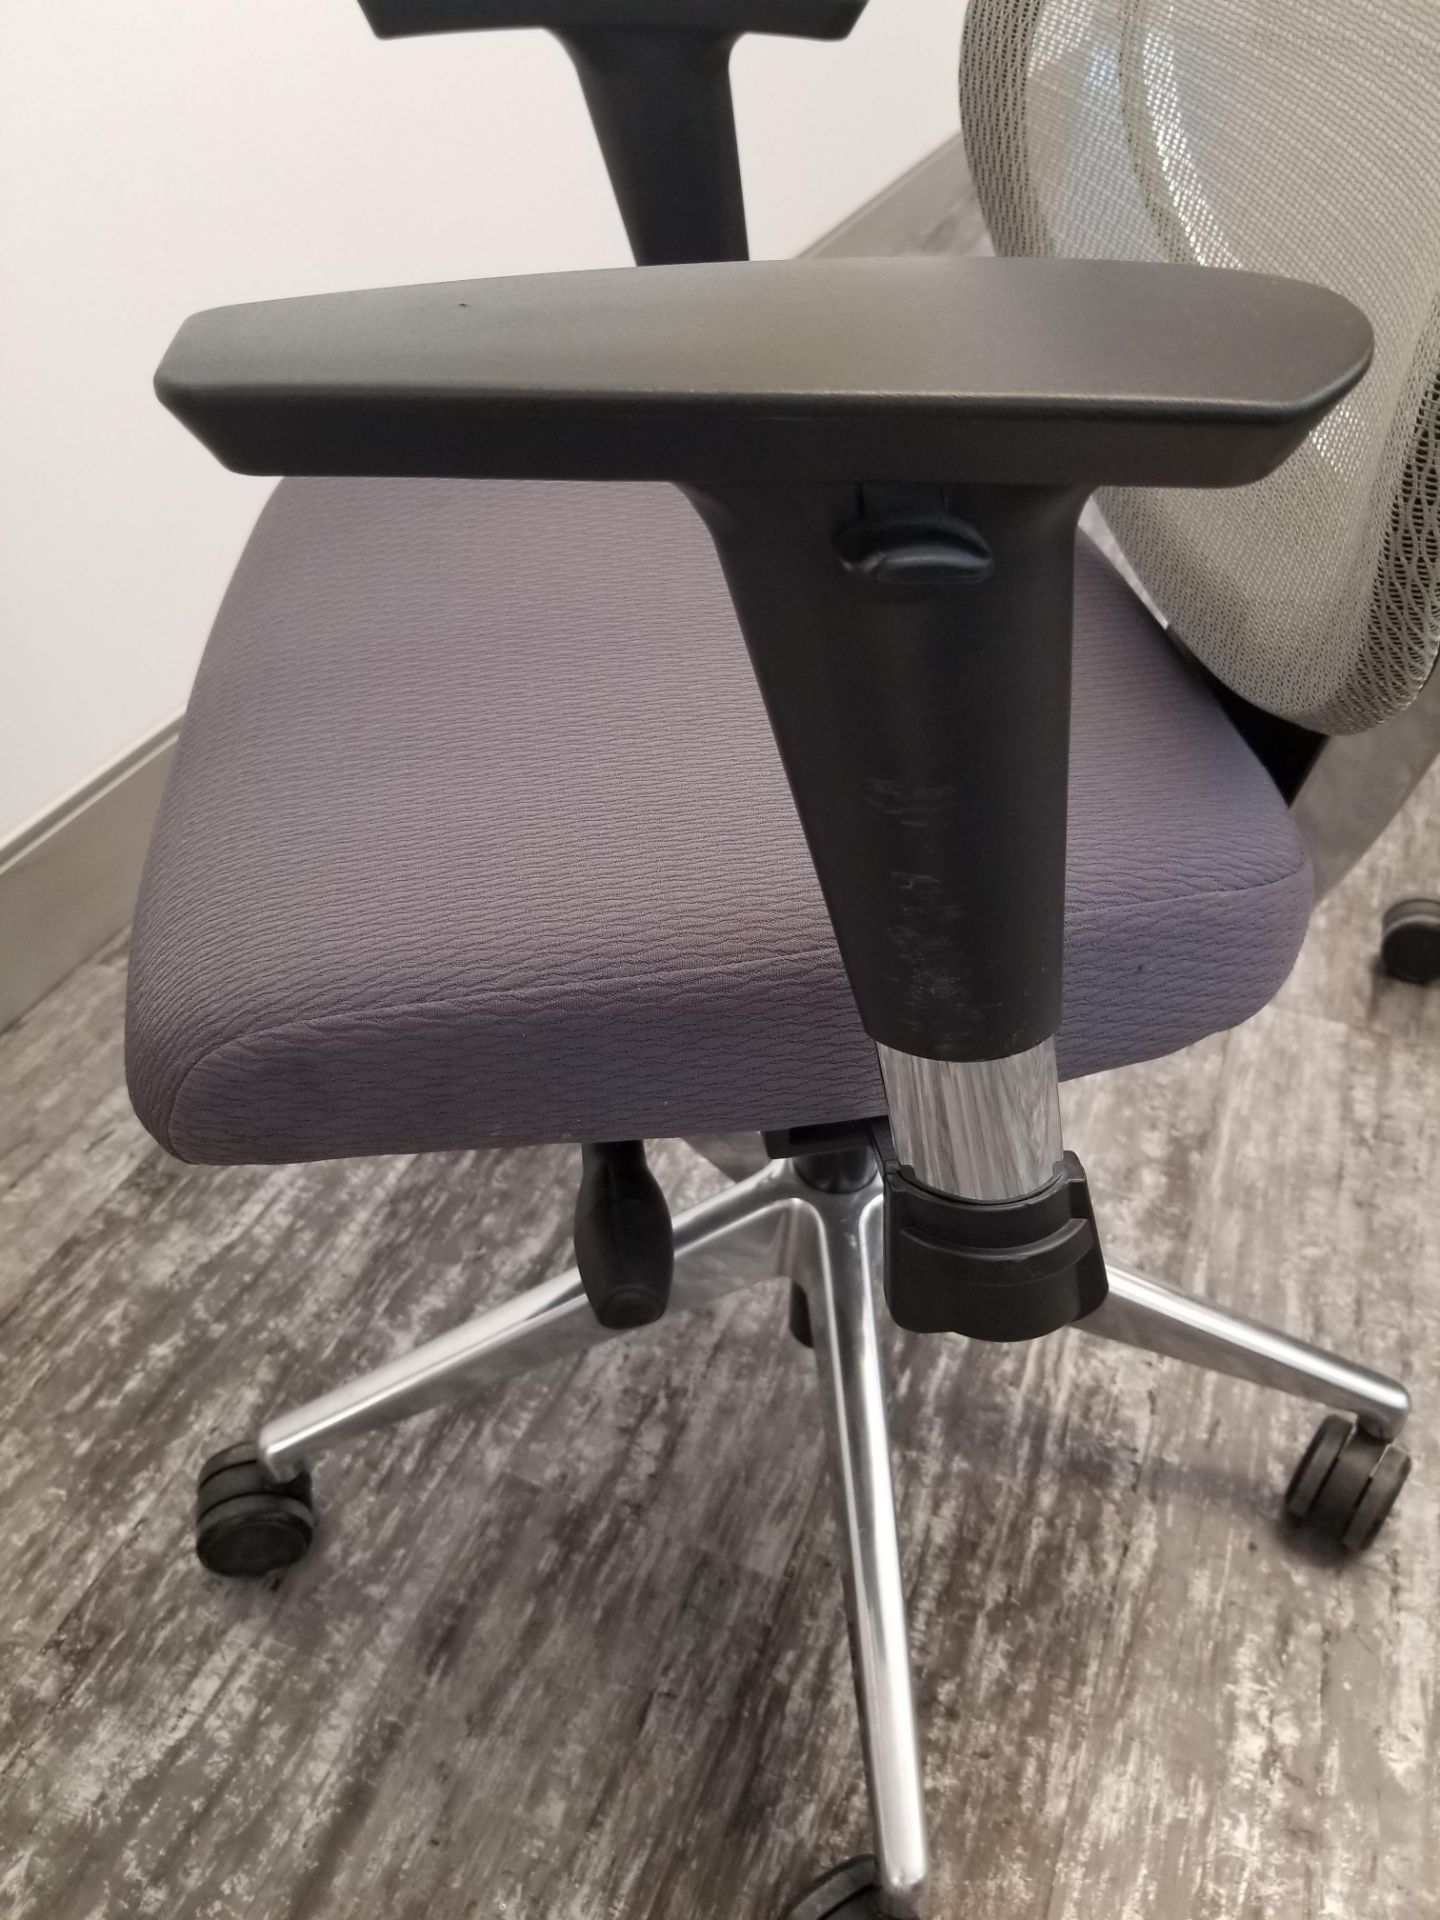 ALLSEATING - EXEC. CHAIR ON CASTERS, GREY W/ MESH BACK, ADJUSTABLE HEIGHT, ADJUSTABLE ARMS - Image 4 of 7